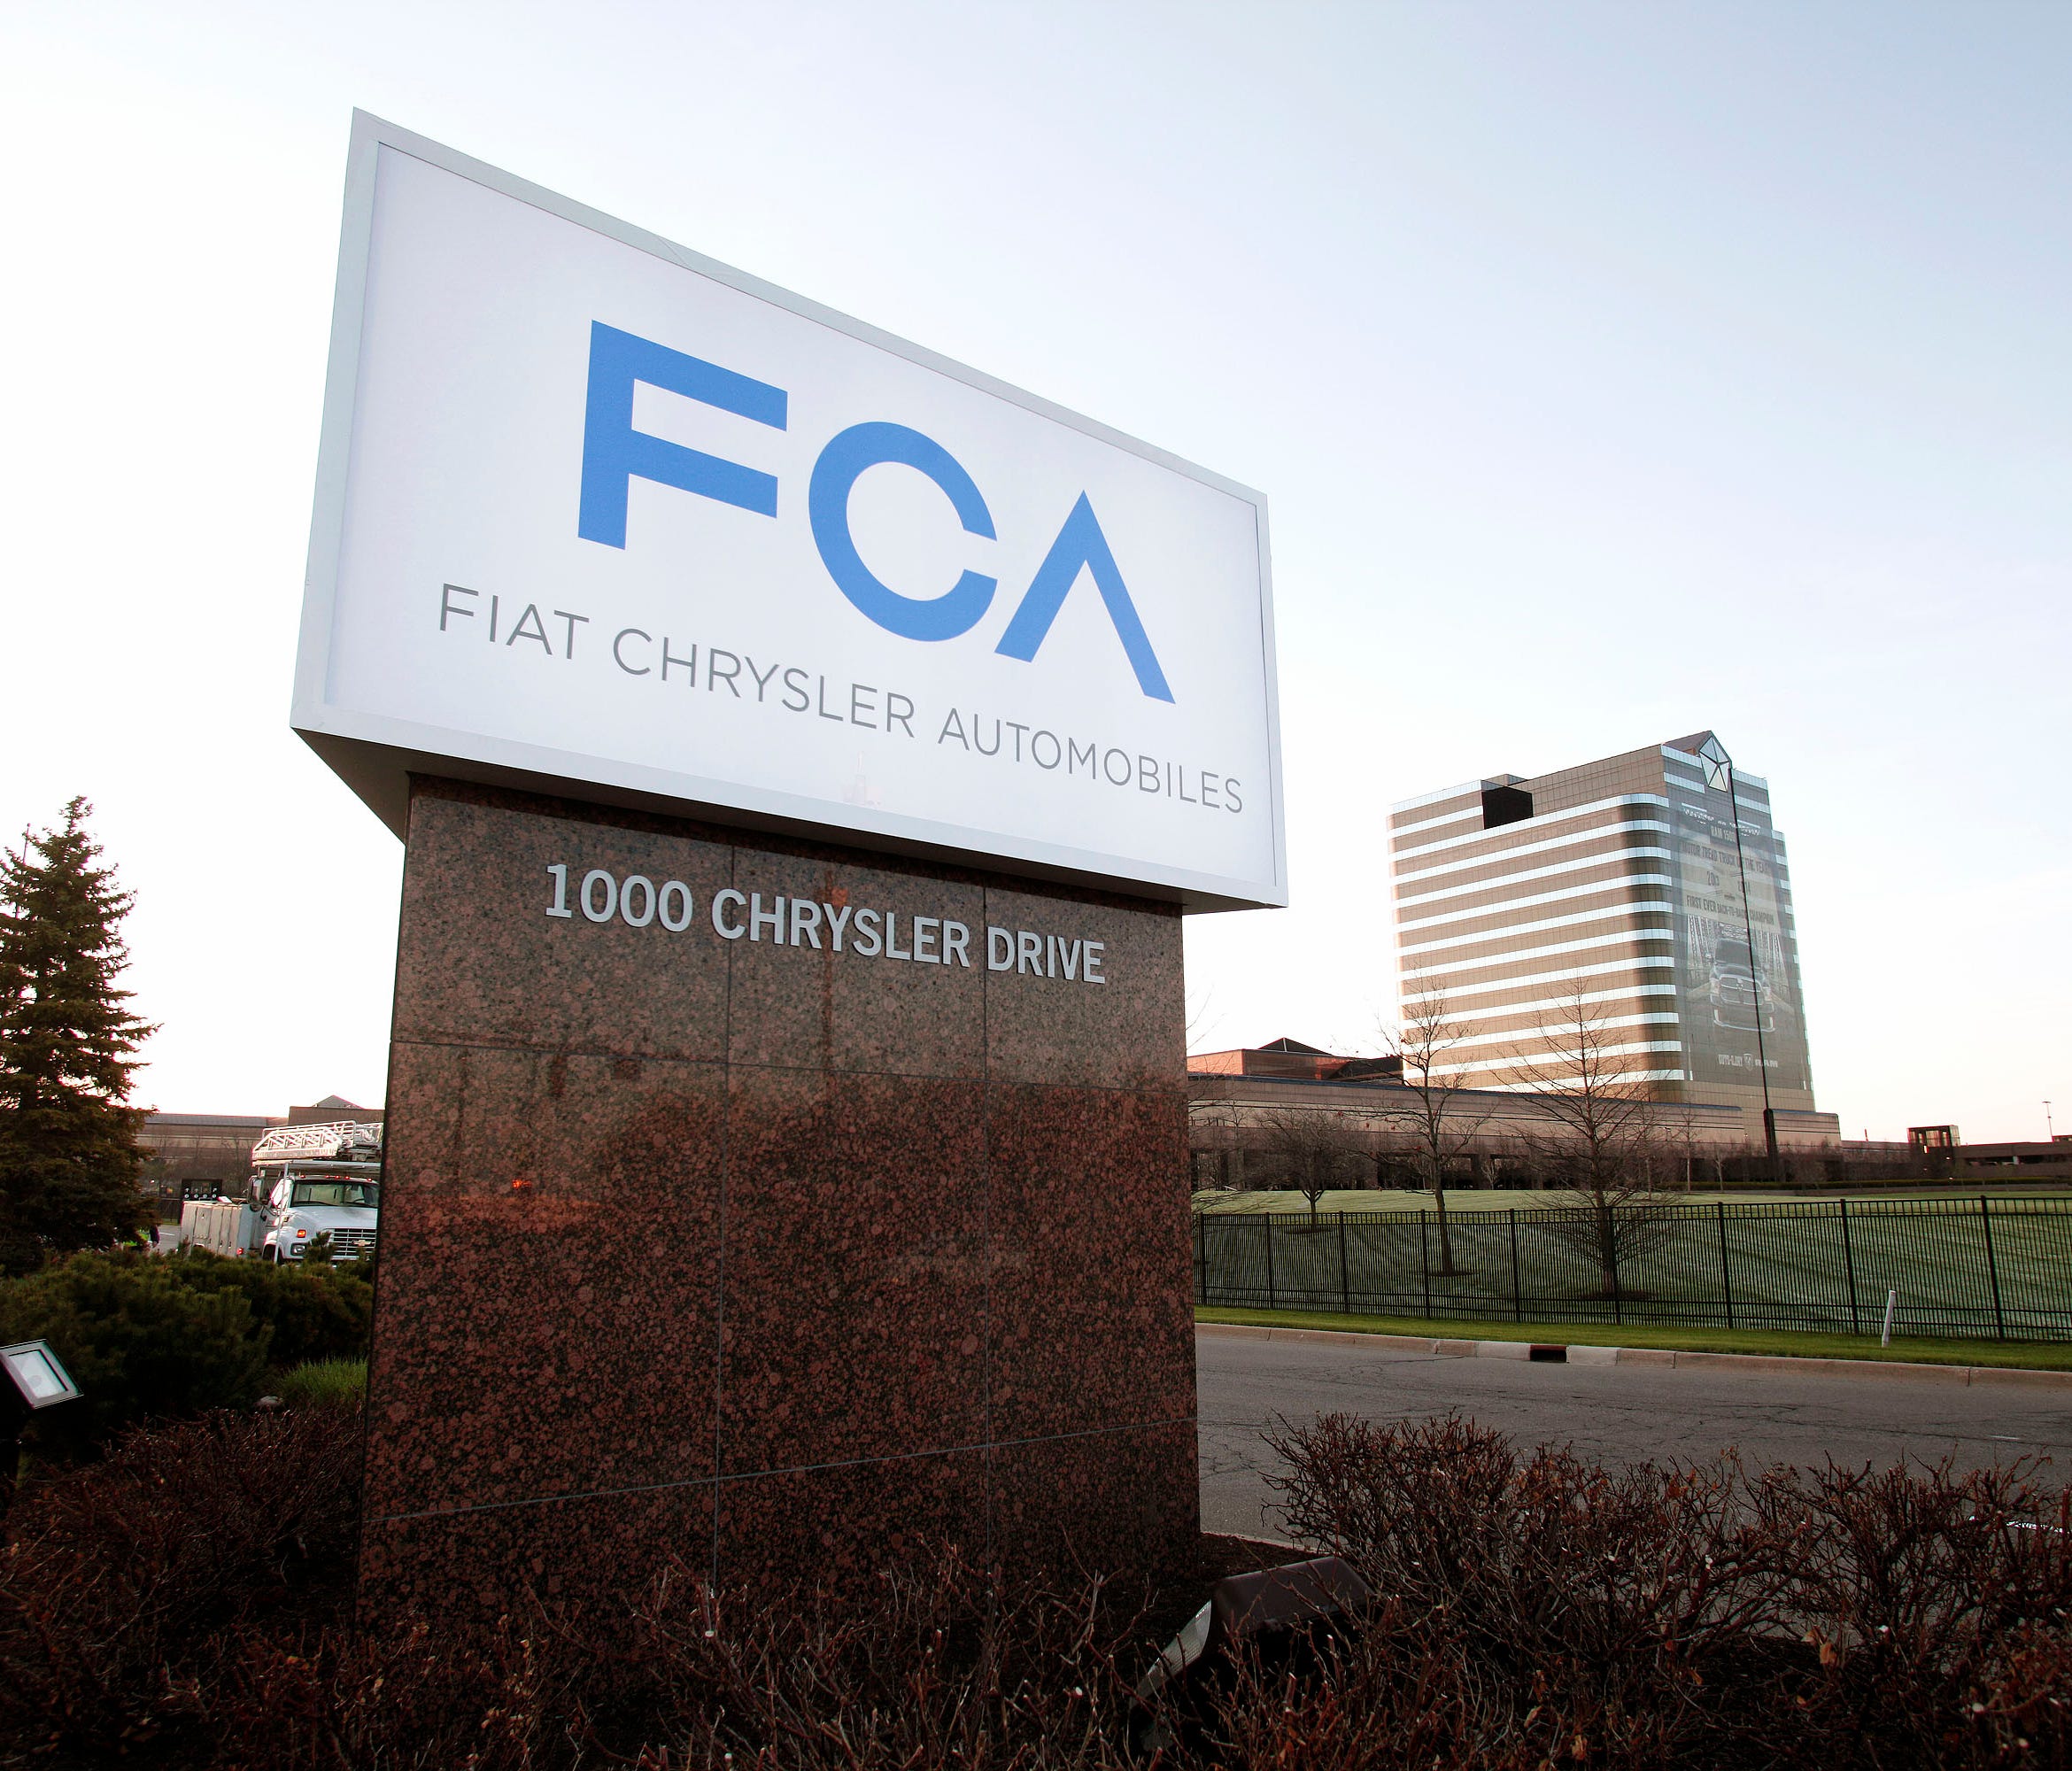 Fiat Chrysler Automobiles (FCA) Group sign is shown at the Chrysler Group headquarters in Auburn Hills, Mich.